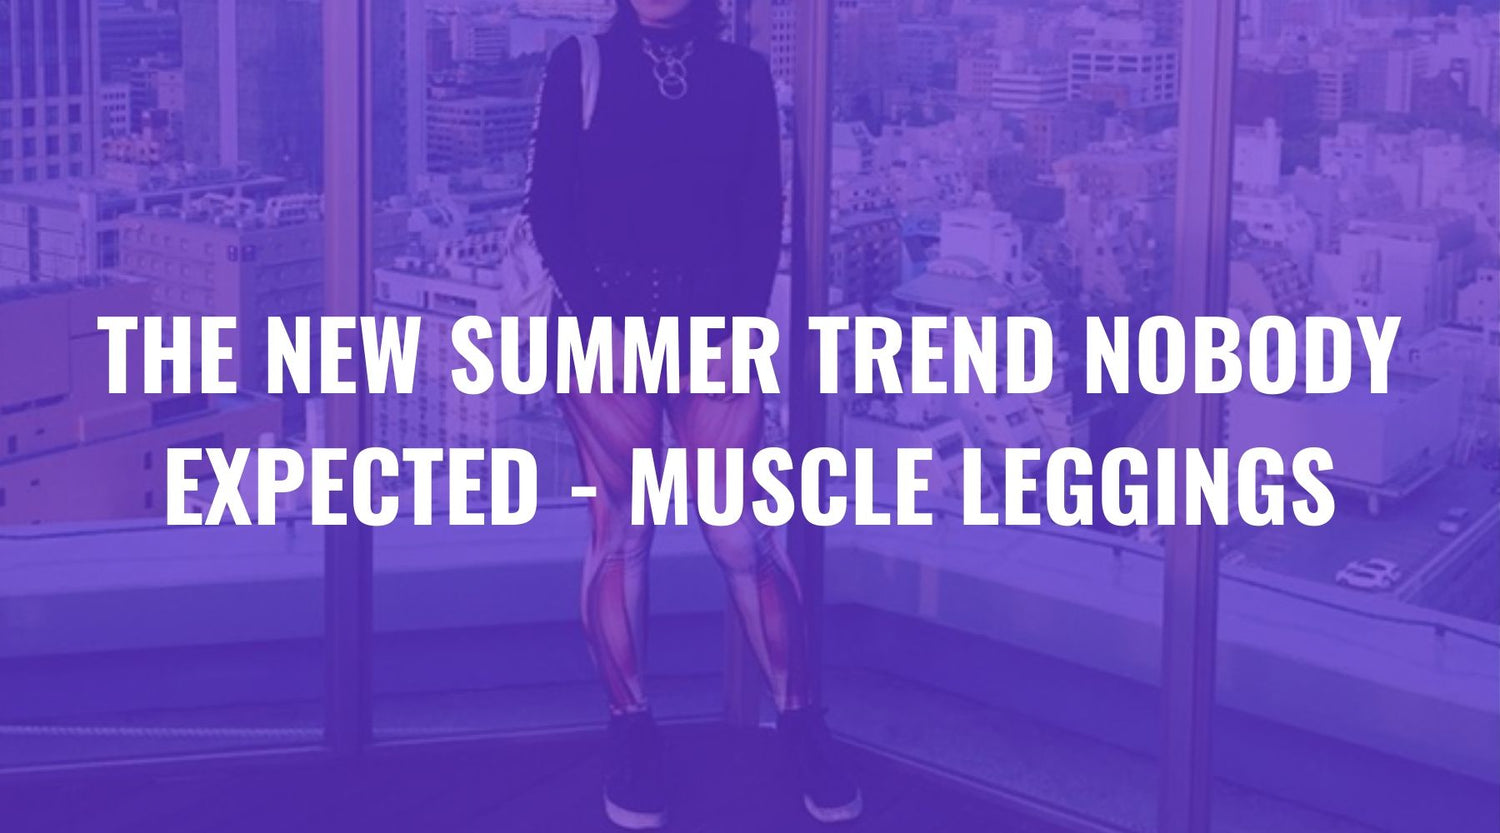 The New Summer Trend Nobody Expected - Muscle Leggings